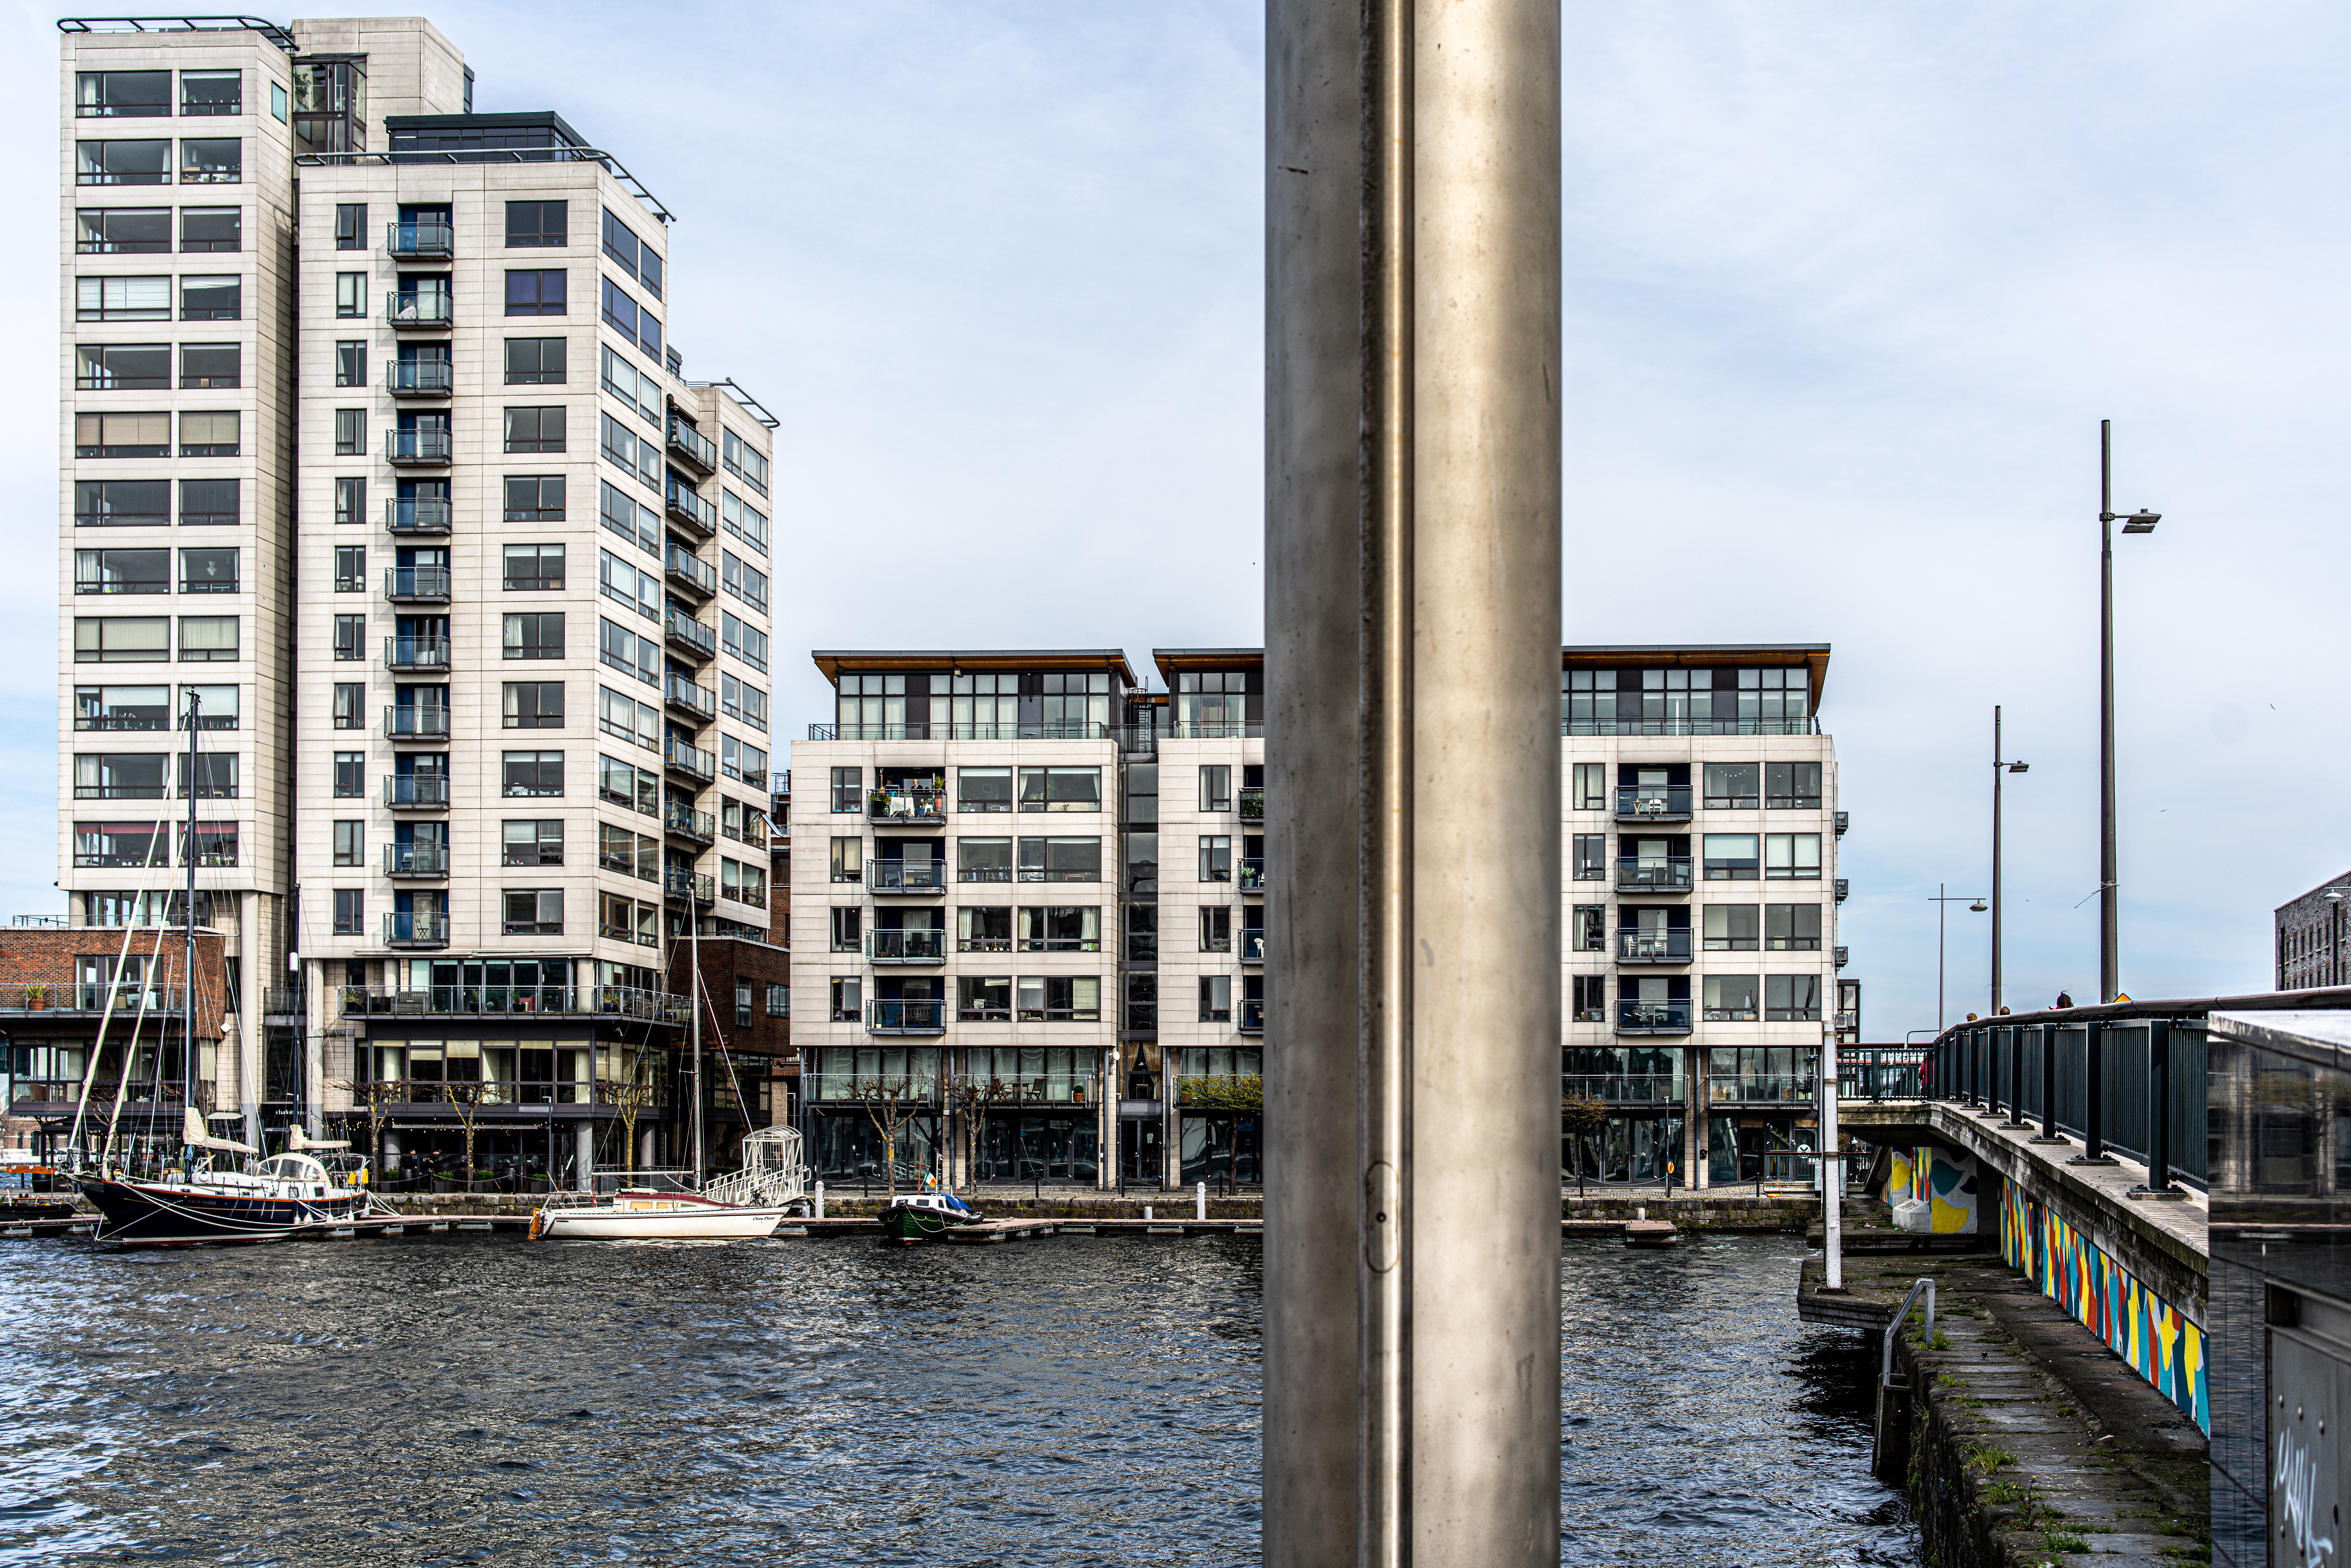  GRAND CANAL SQUARE 003 